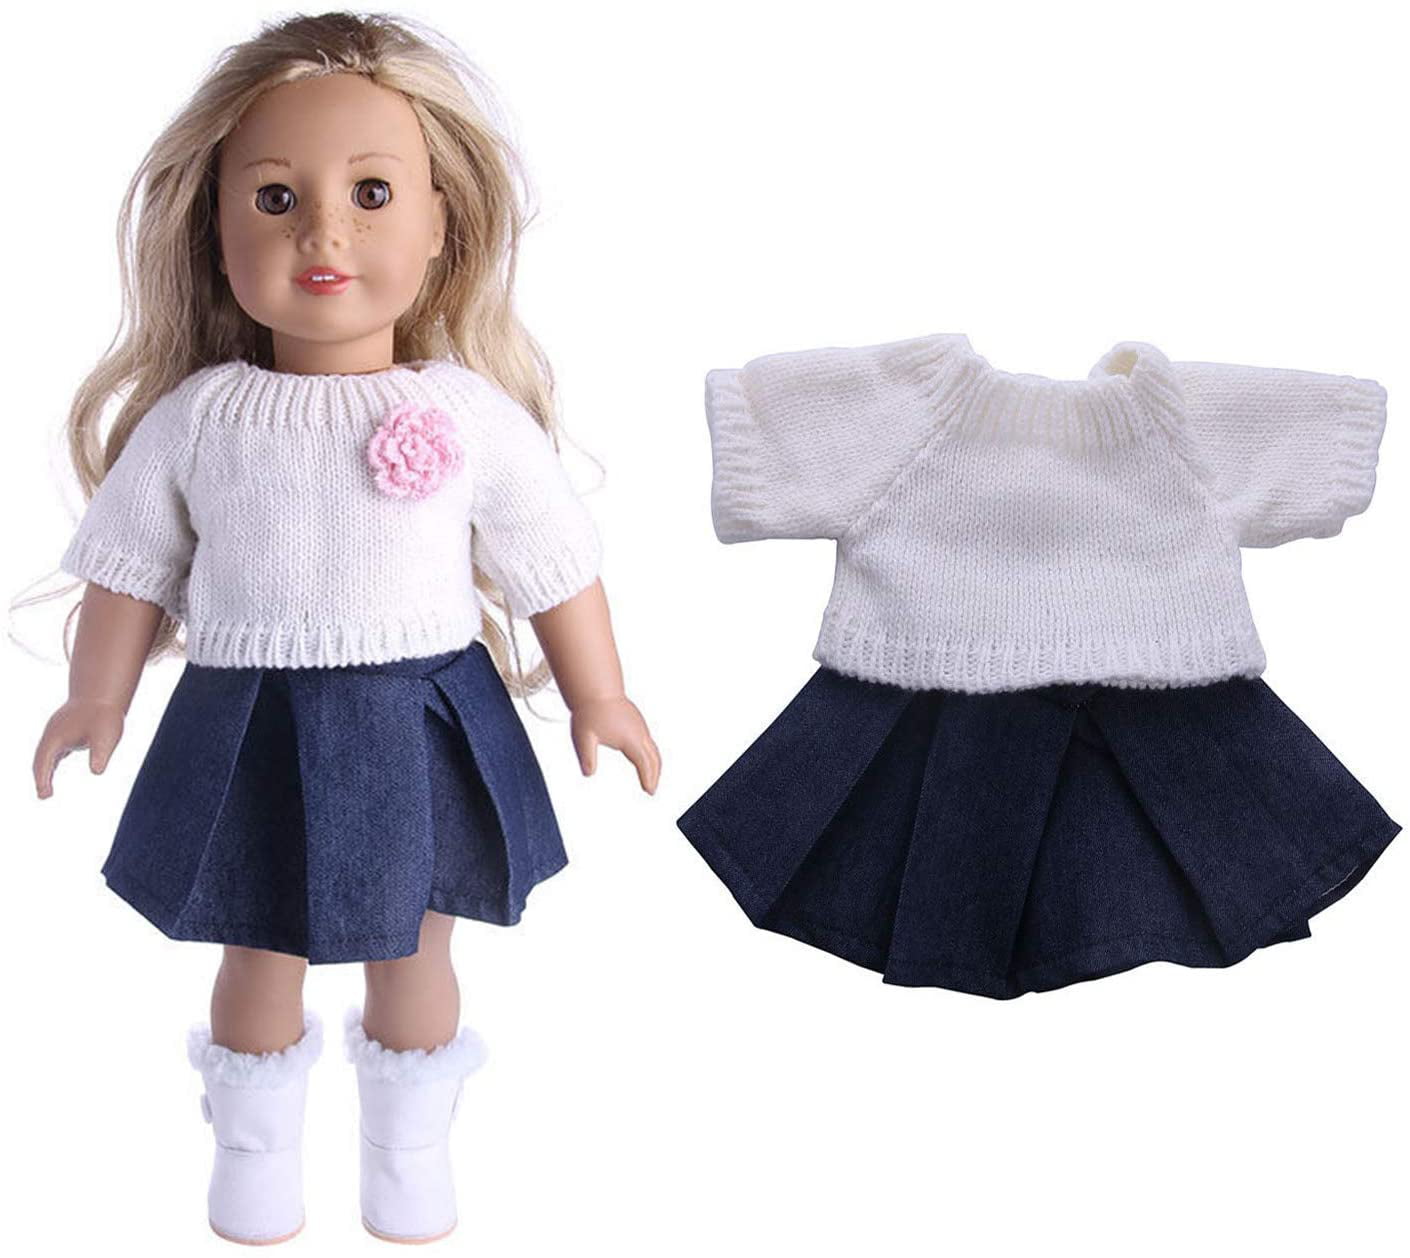 For Baby Born Doll Accessory For 18 inch Outfit Set Clothes Girl Gifts New Hot 